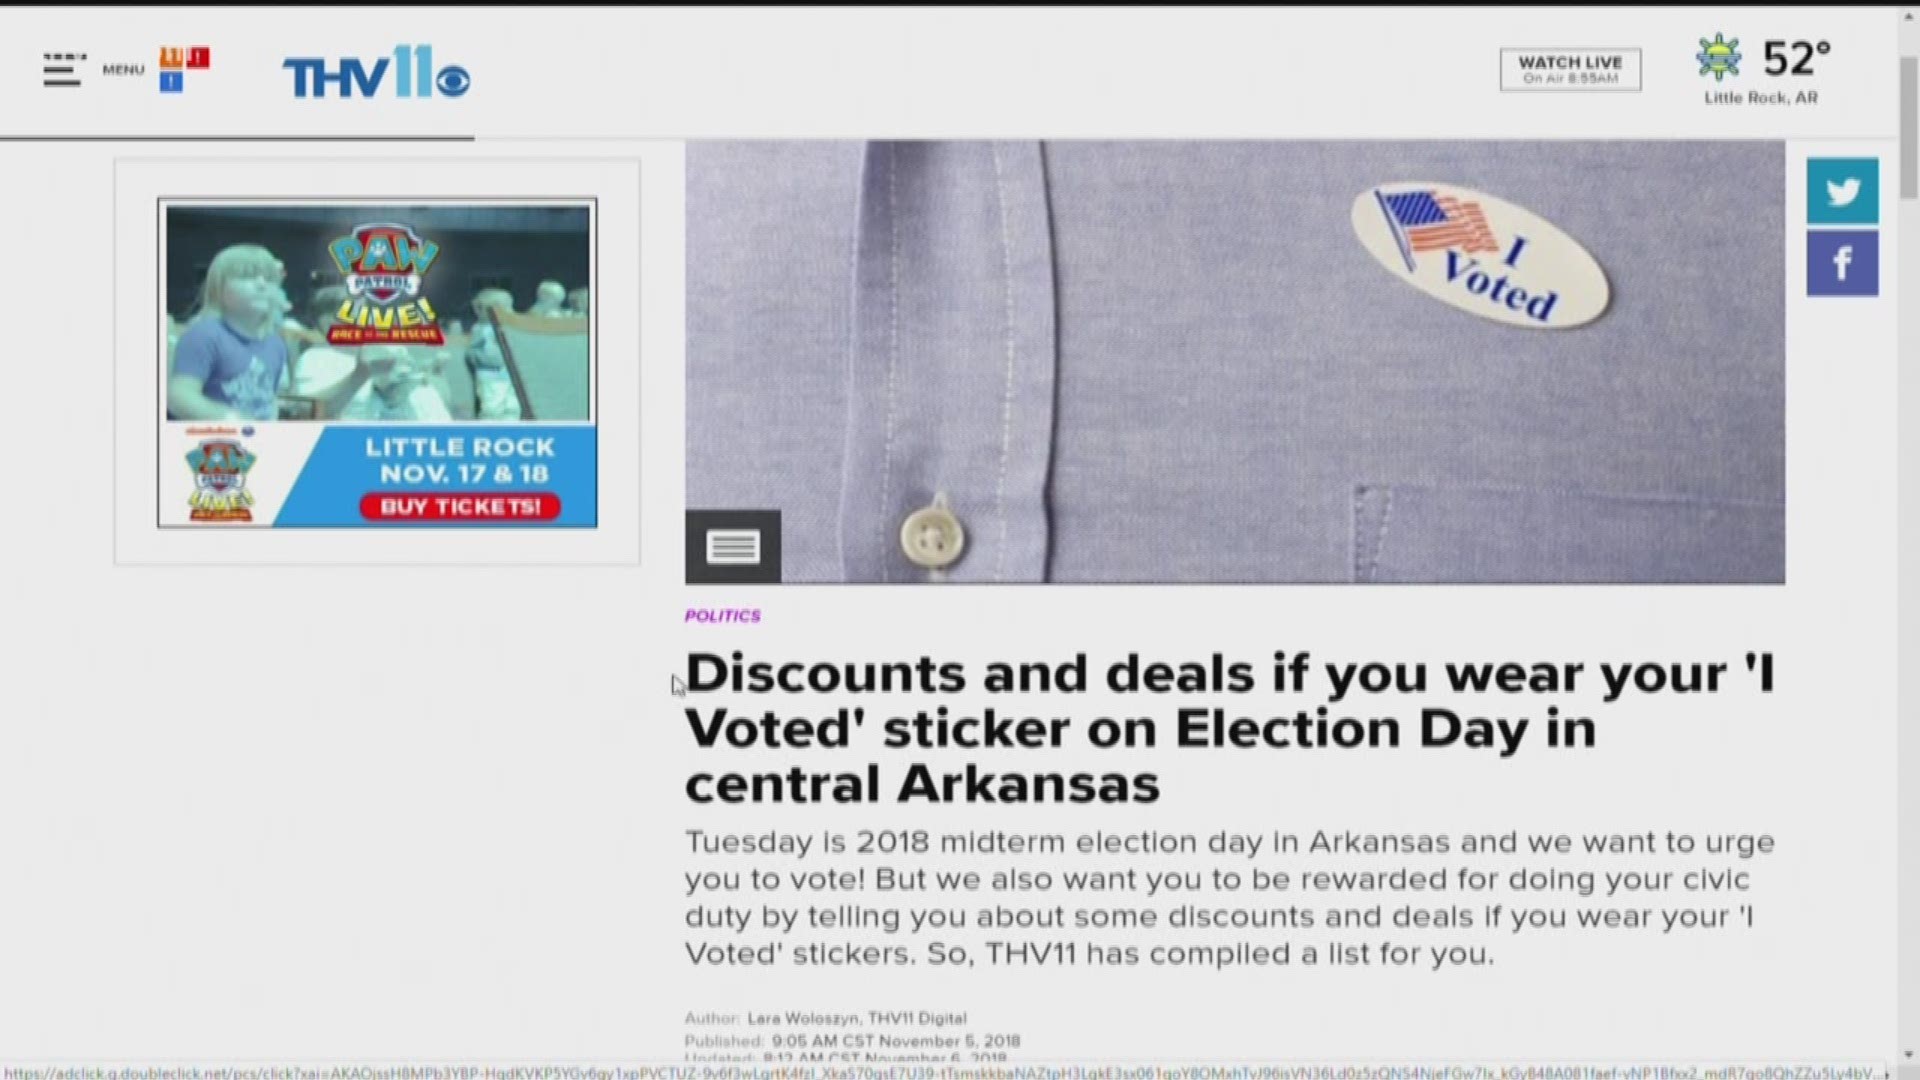 A list of businesses in central Arkansas that are offering deals and discounts if you wear your 'I voted' stickers.